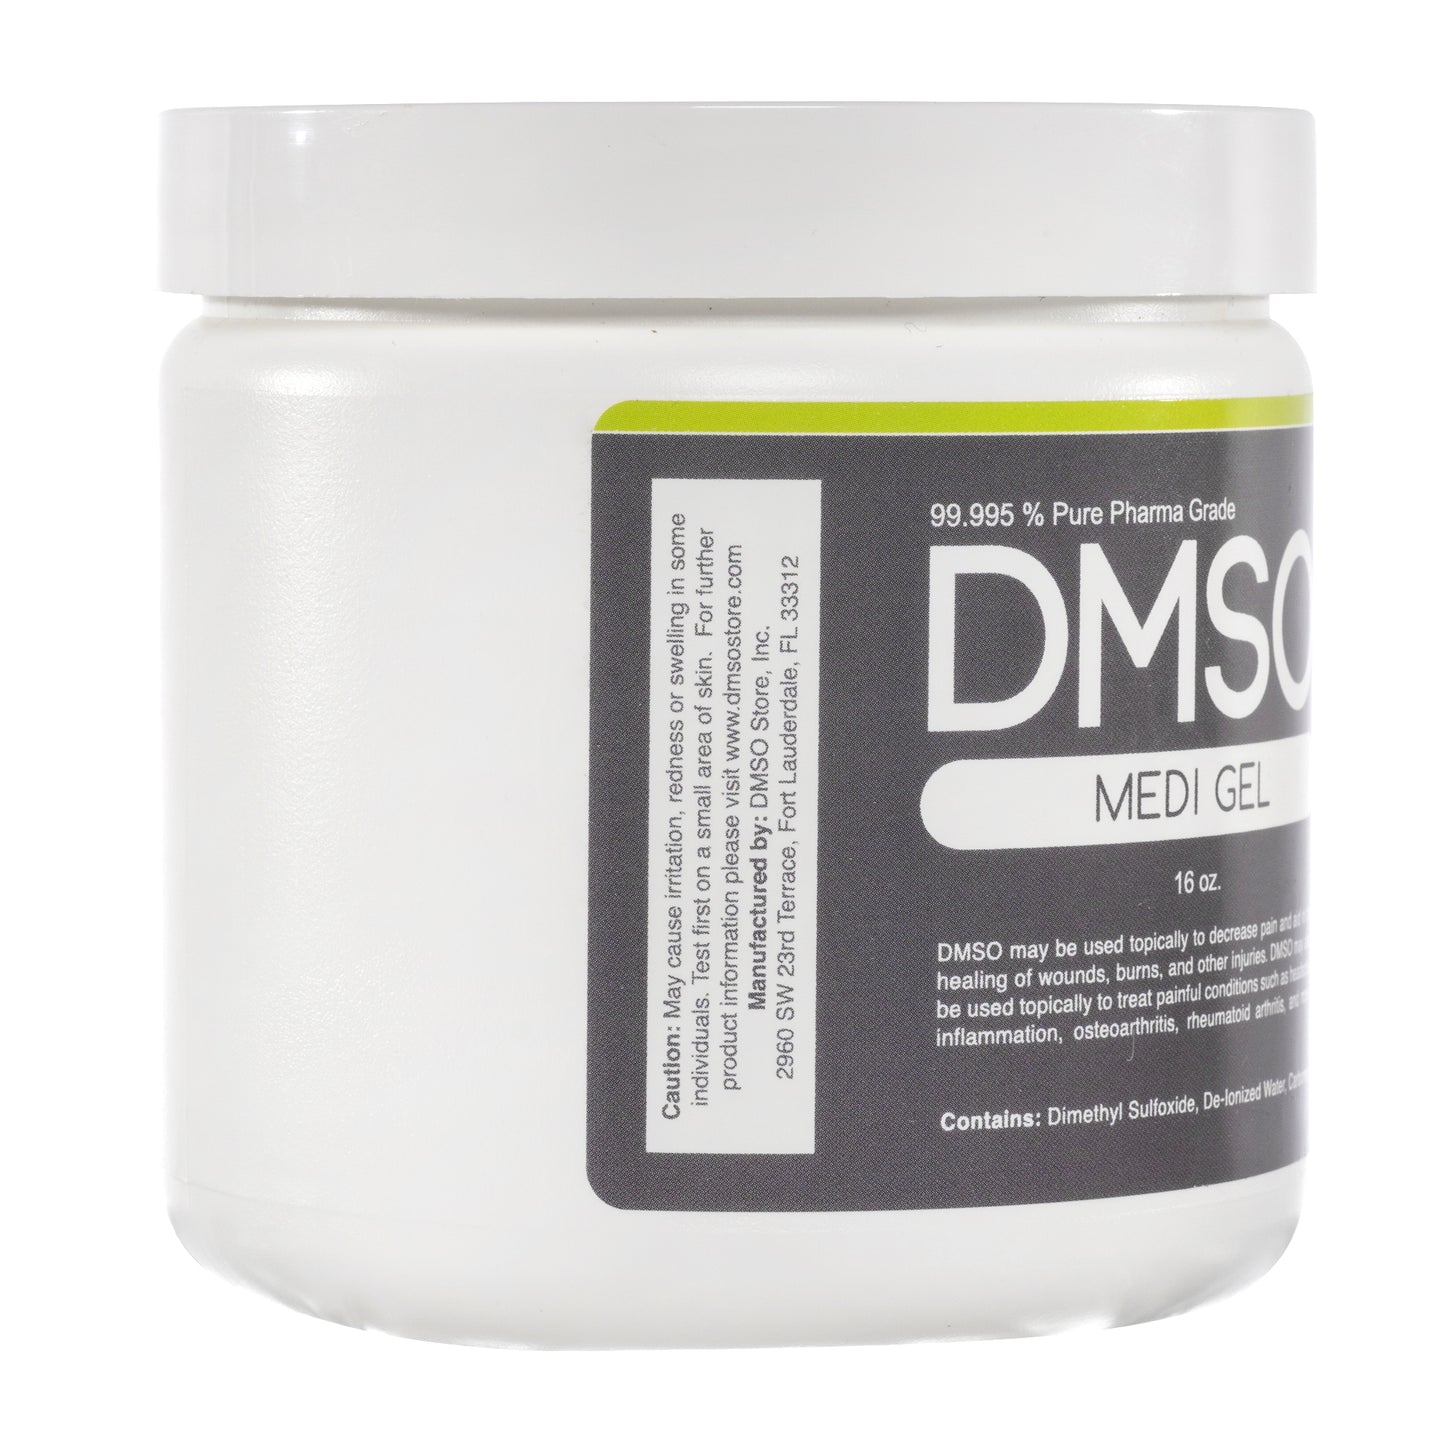 DMSO-gel-99.995-pure-dimethyl-sulfoxide-anti-inflammatory-pain-16-oz-sideview. Side view of a White 16 oz jar with white twist on lid. Label reads 99.995% Pure pharma grade DMSO Medi Gel 16 oz. DMSO may be used topically to decrease pain and aid in the healing of wounds,burns and other injuries. DMSO may also be used topically to treat painful conditions such as headache,inflammation, osteoarthritis, rheumatoid arthritis and more. Contains: Dimethyl Sulfoxide, De-Ionized water, Carbomer